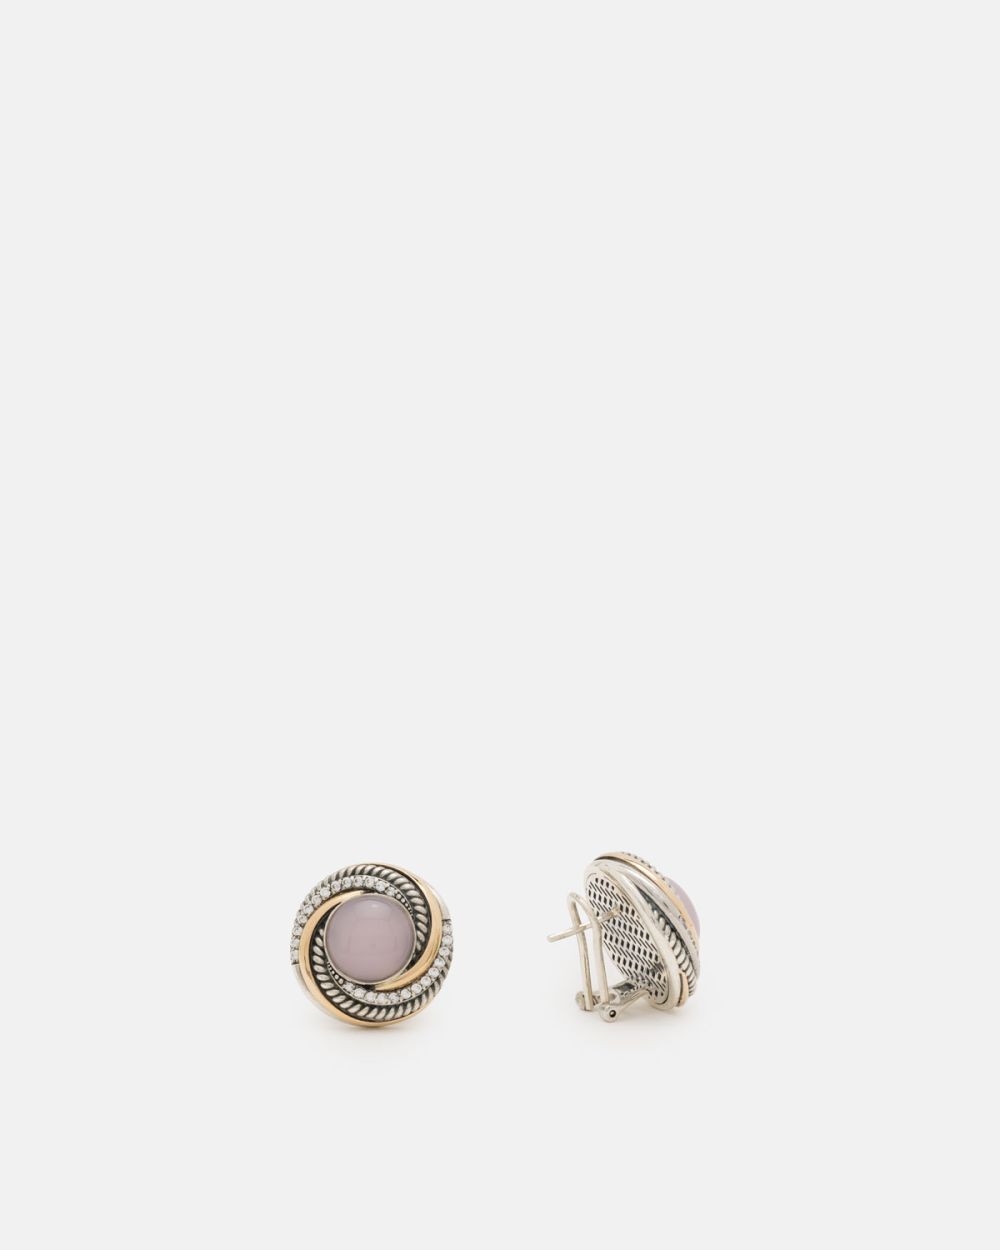 Sublime Earrings in Gold and Silver